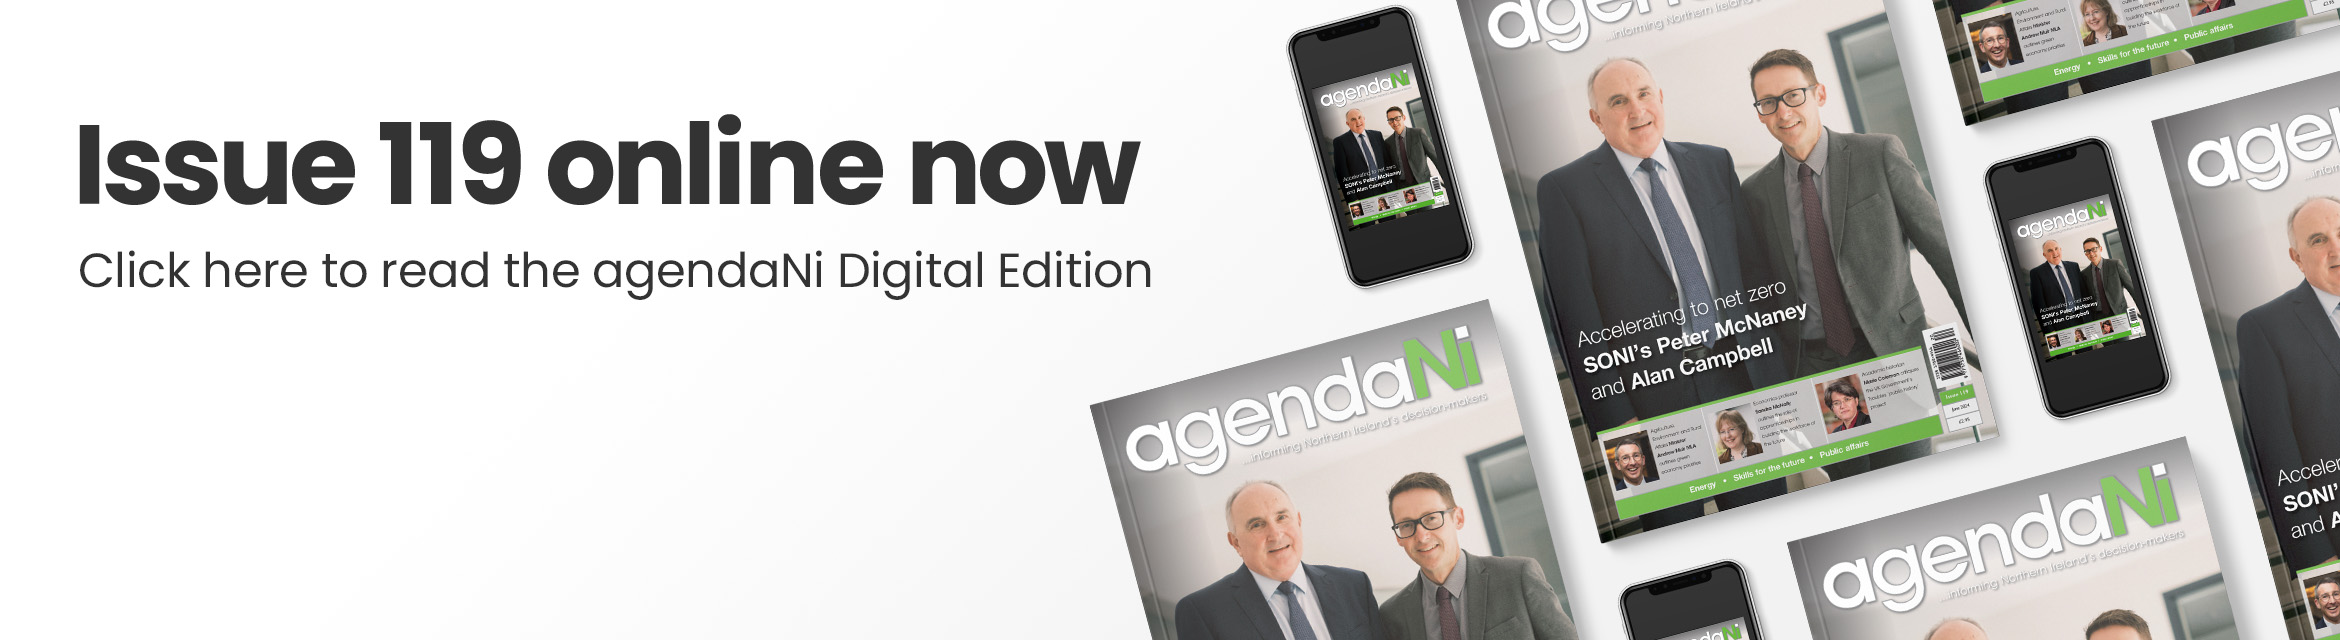 Issue 119 online now. Click here to read the agendaNi Digital Edition.